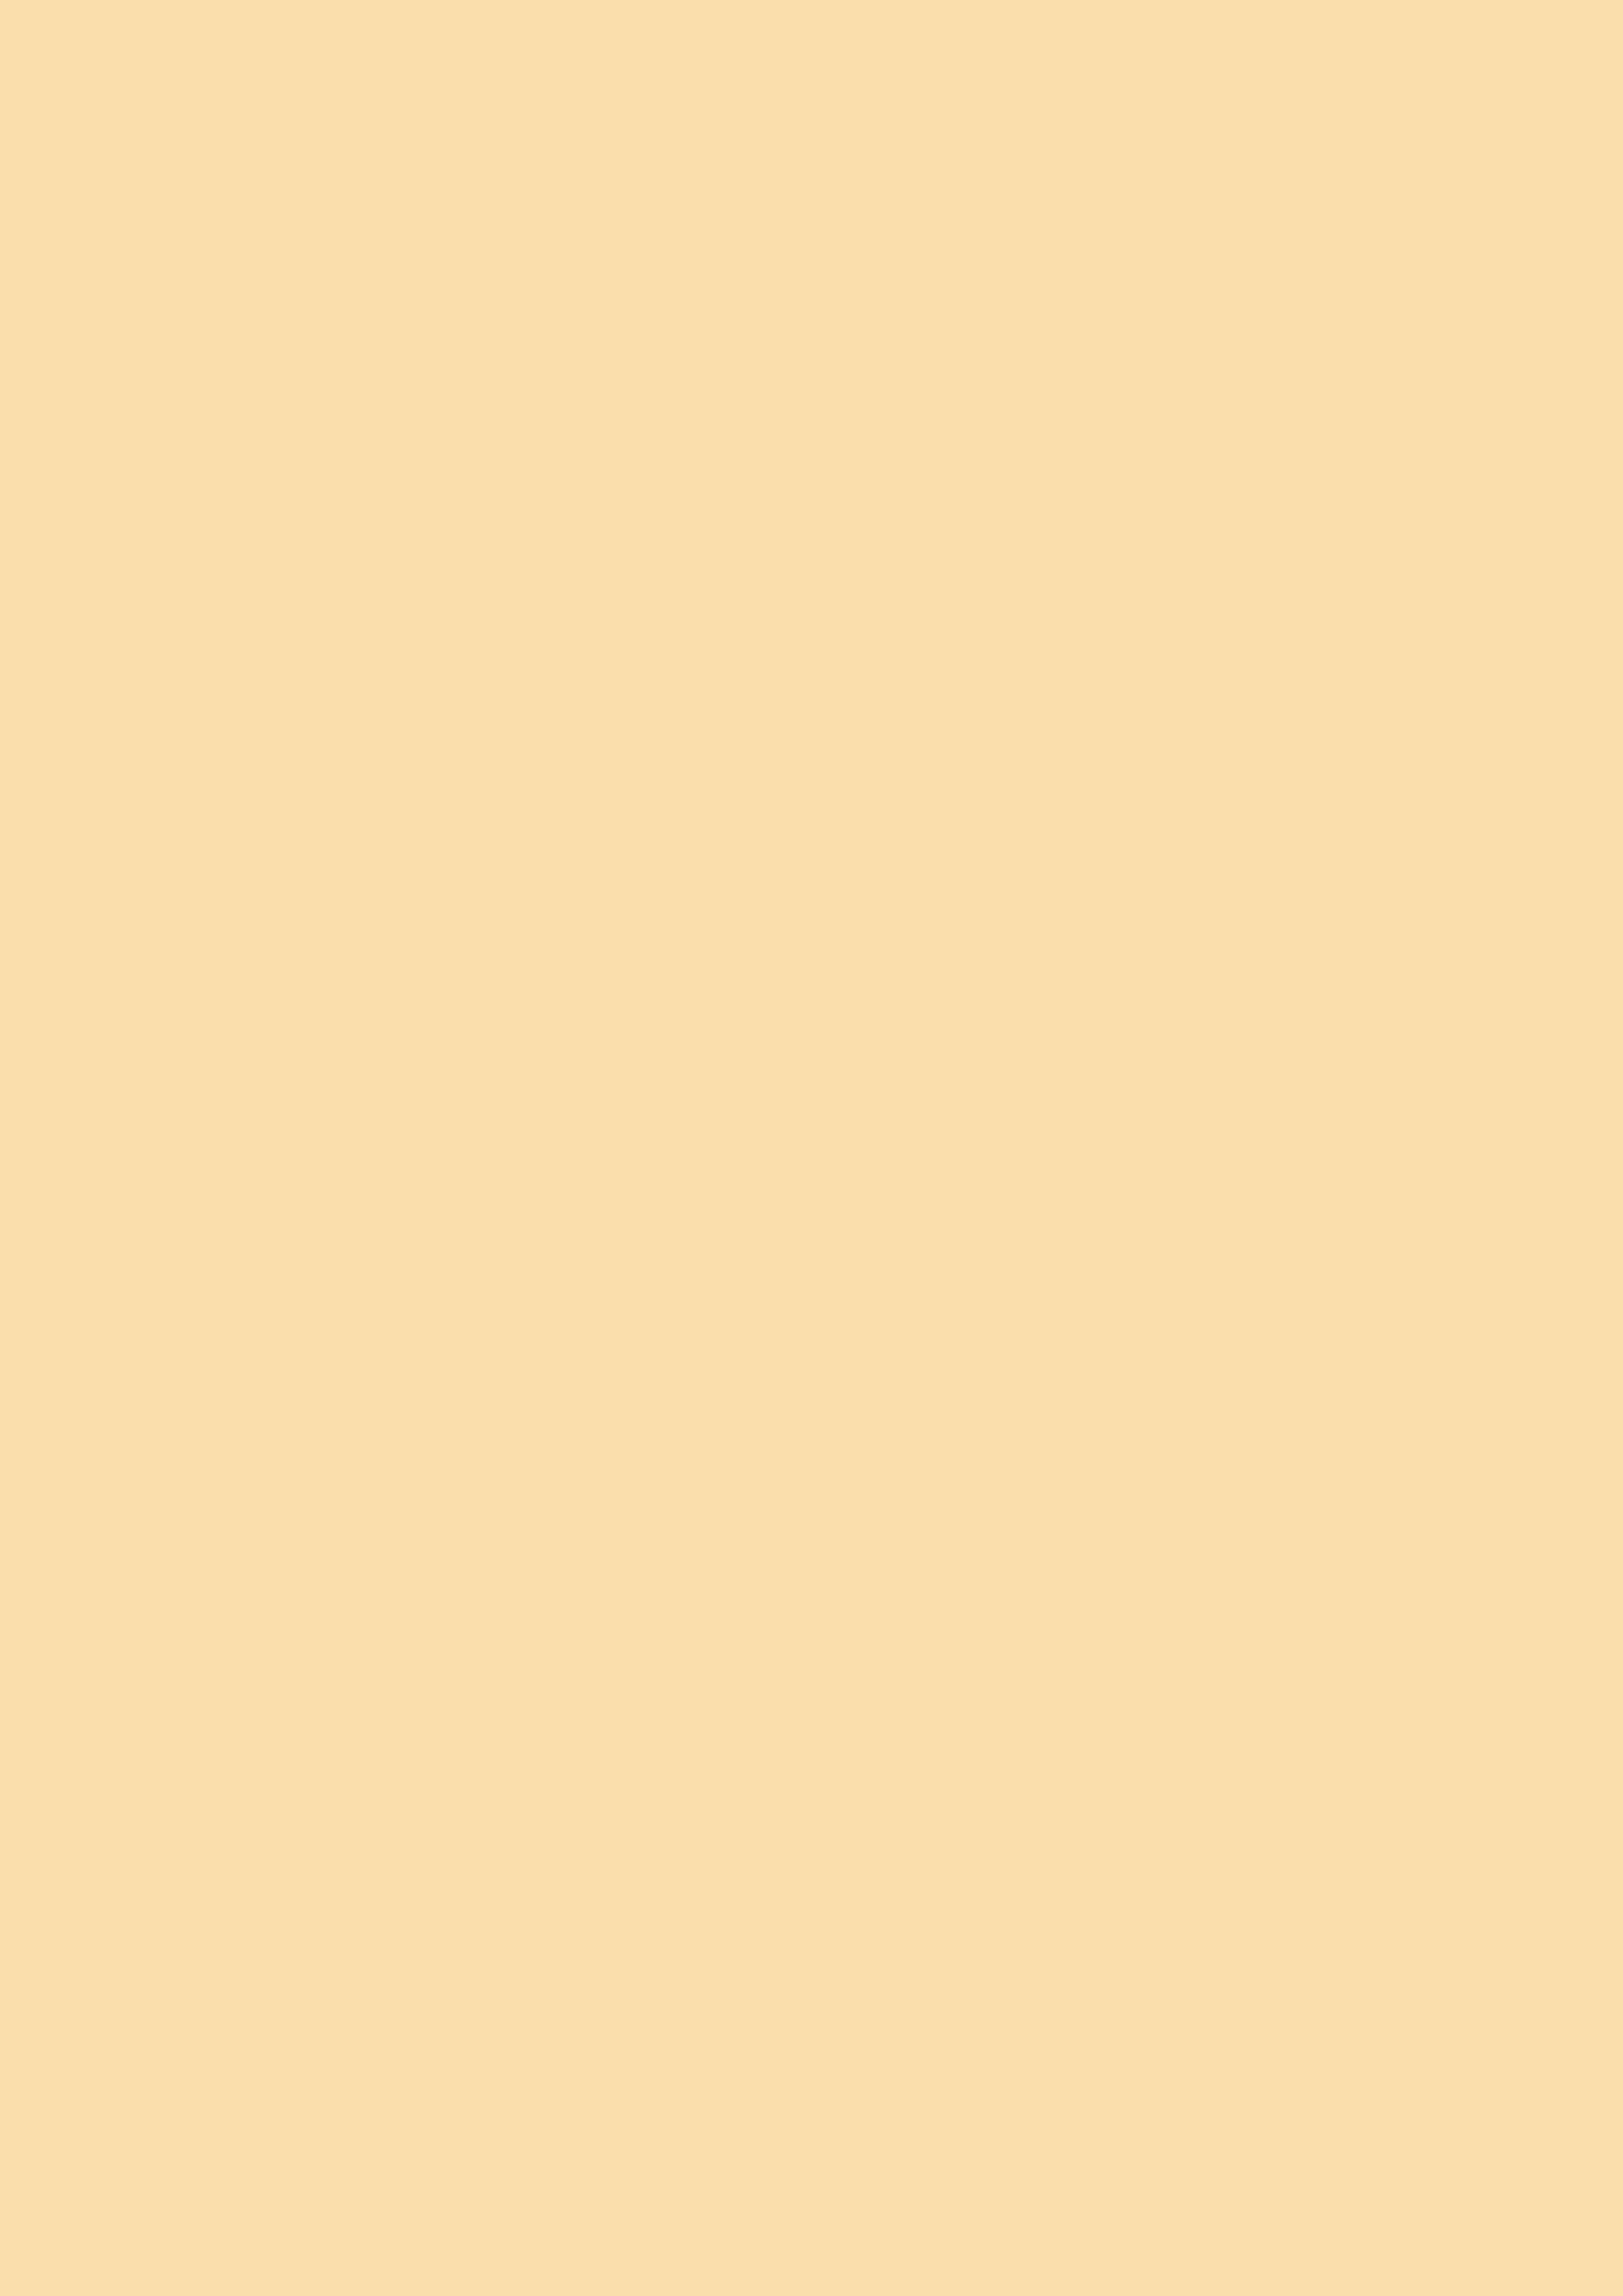 2480x3508 Peach-yellow Solid Color Background